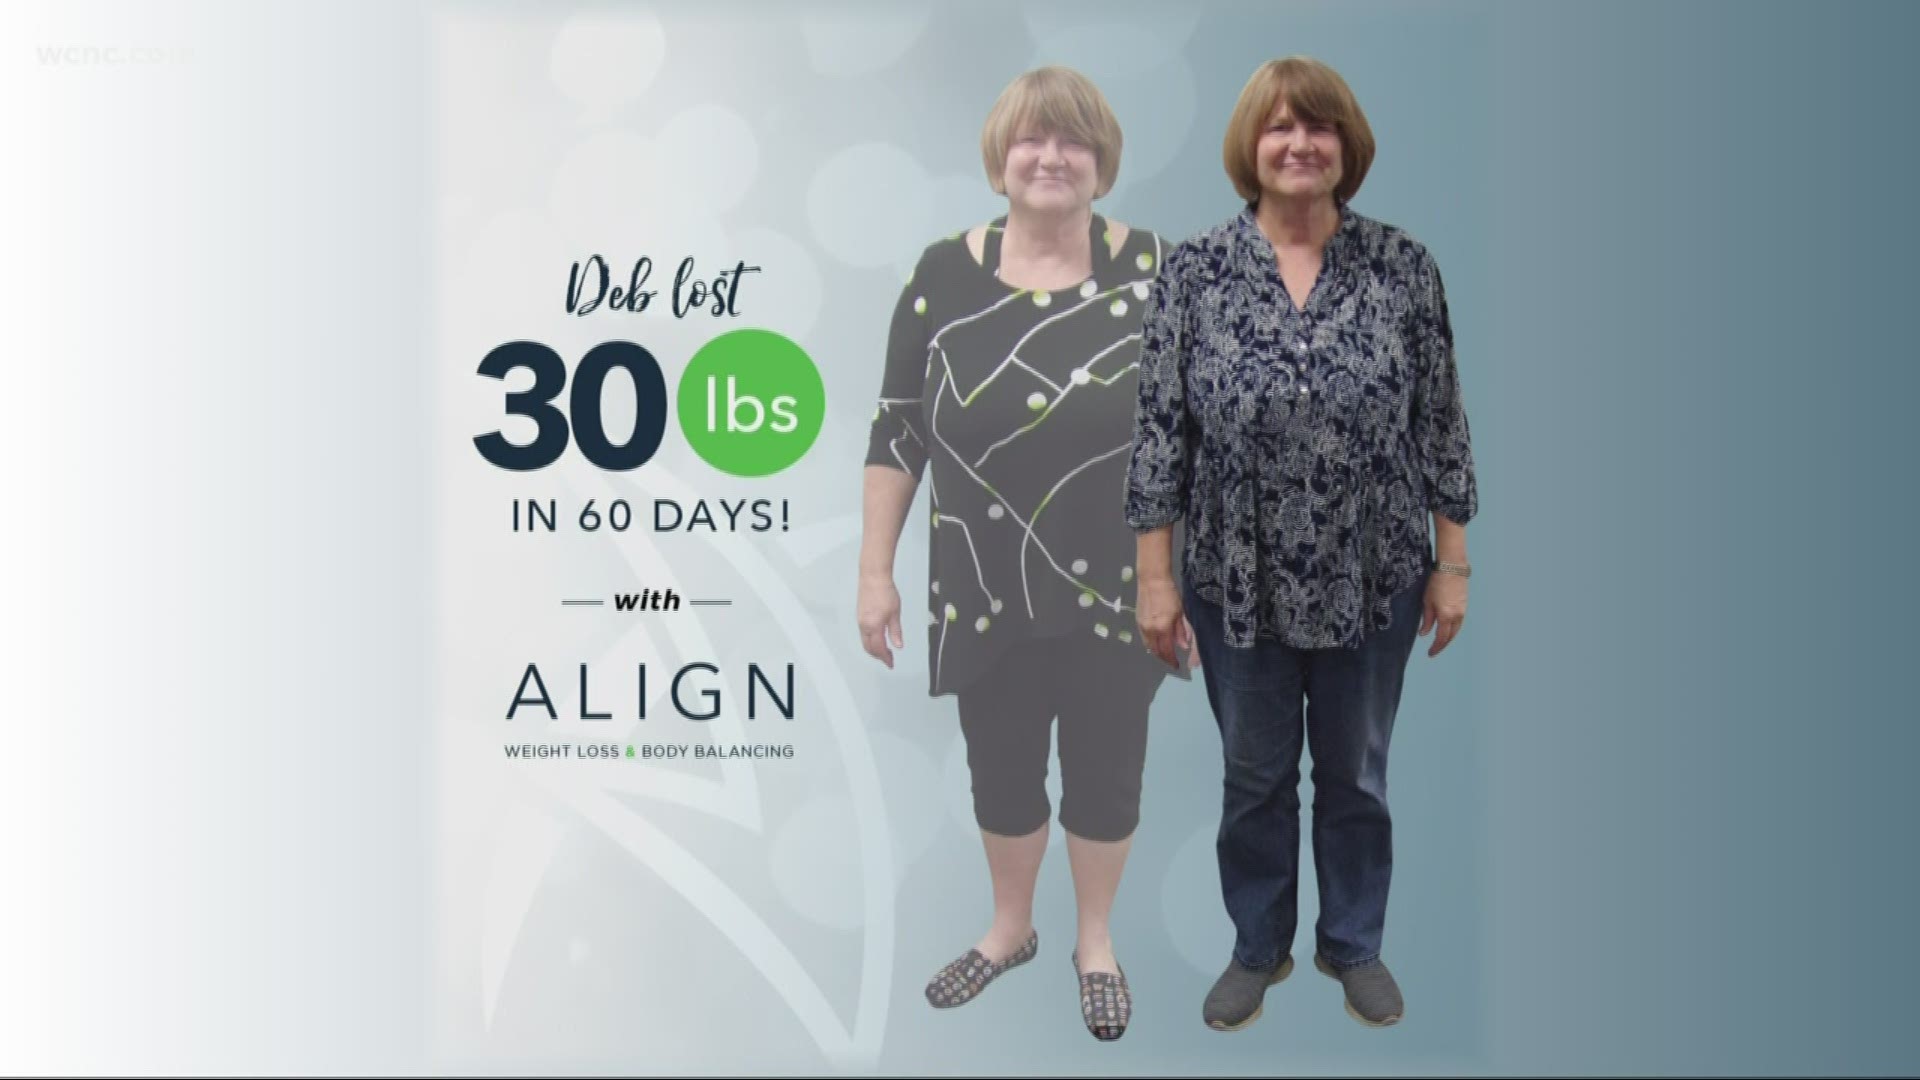 Align Weight Loss and Body Balancing helps patients lose unwanted pounds with customized programs.